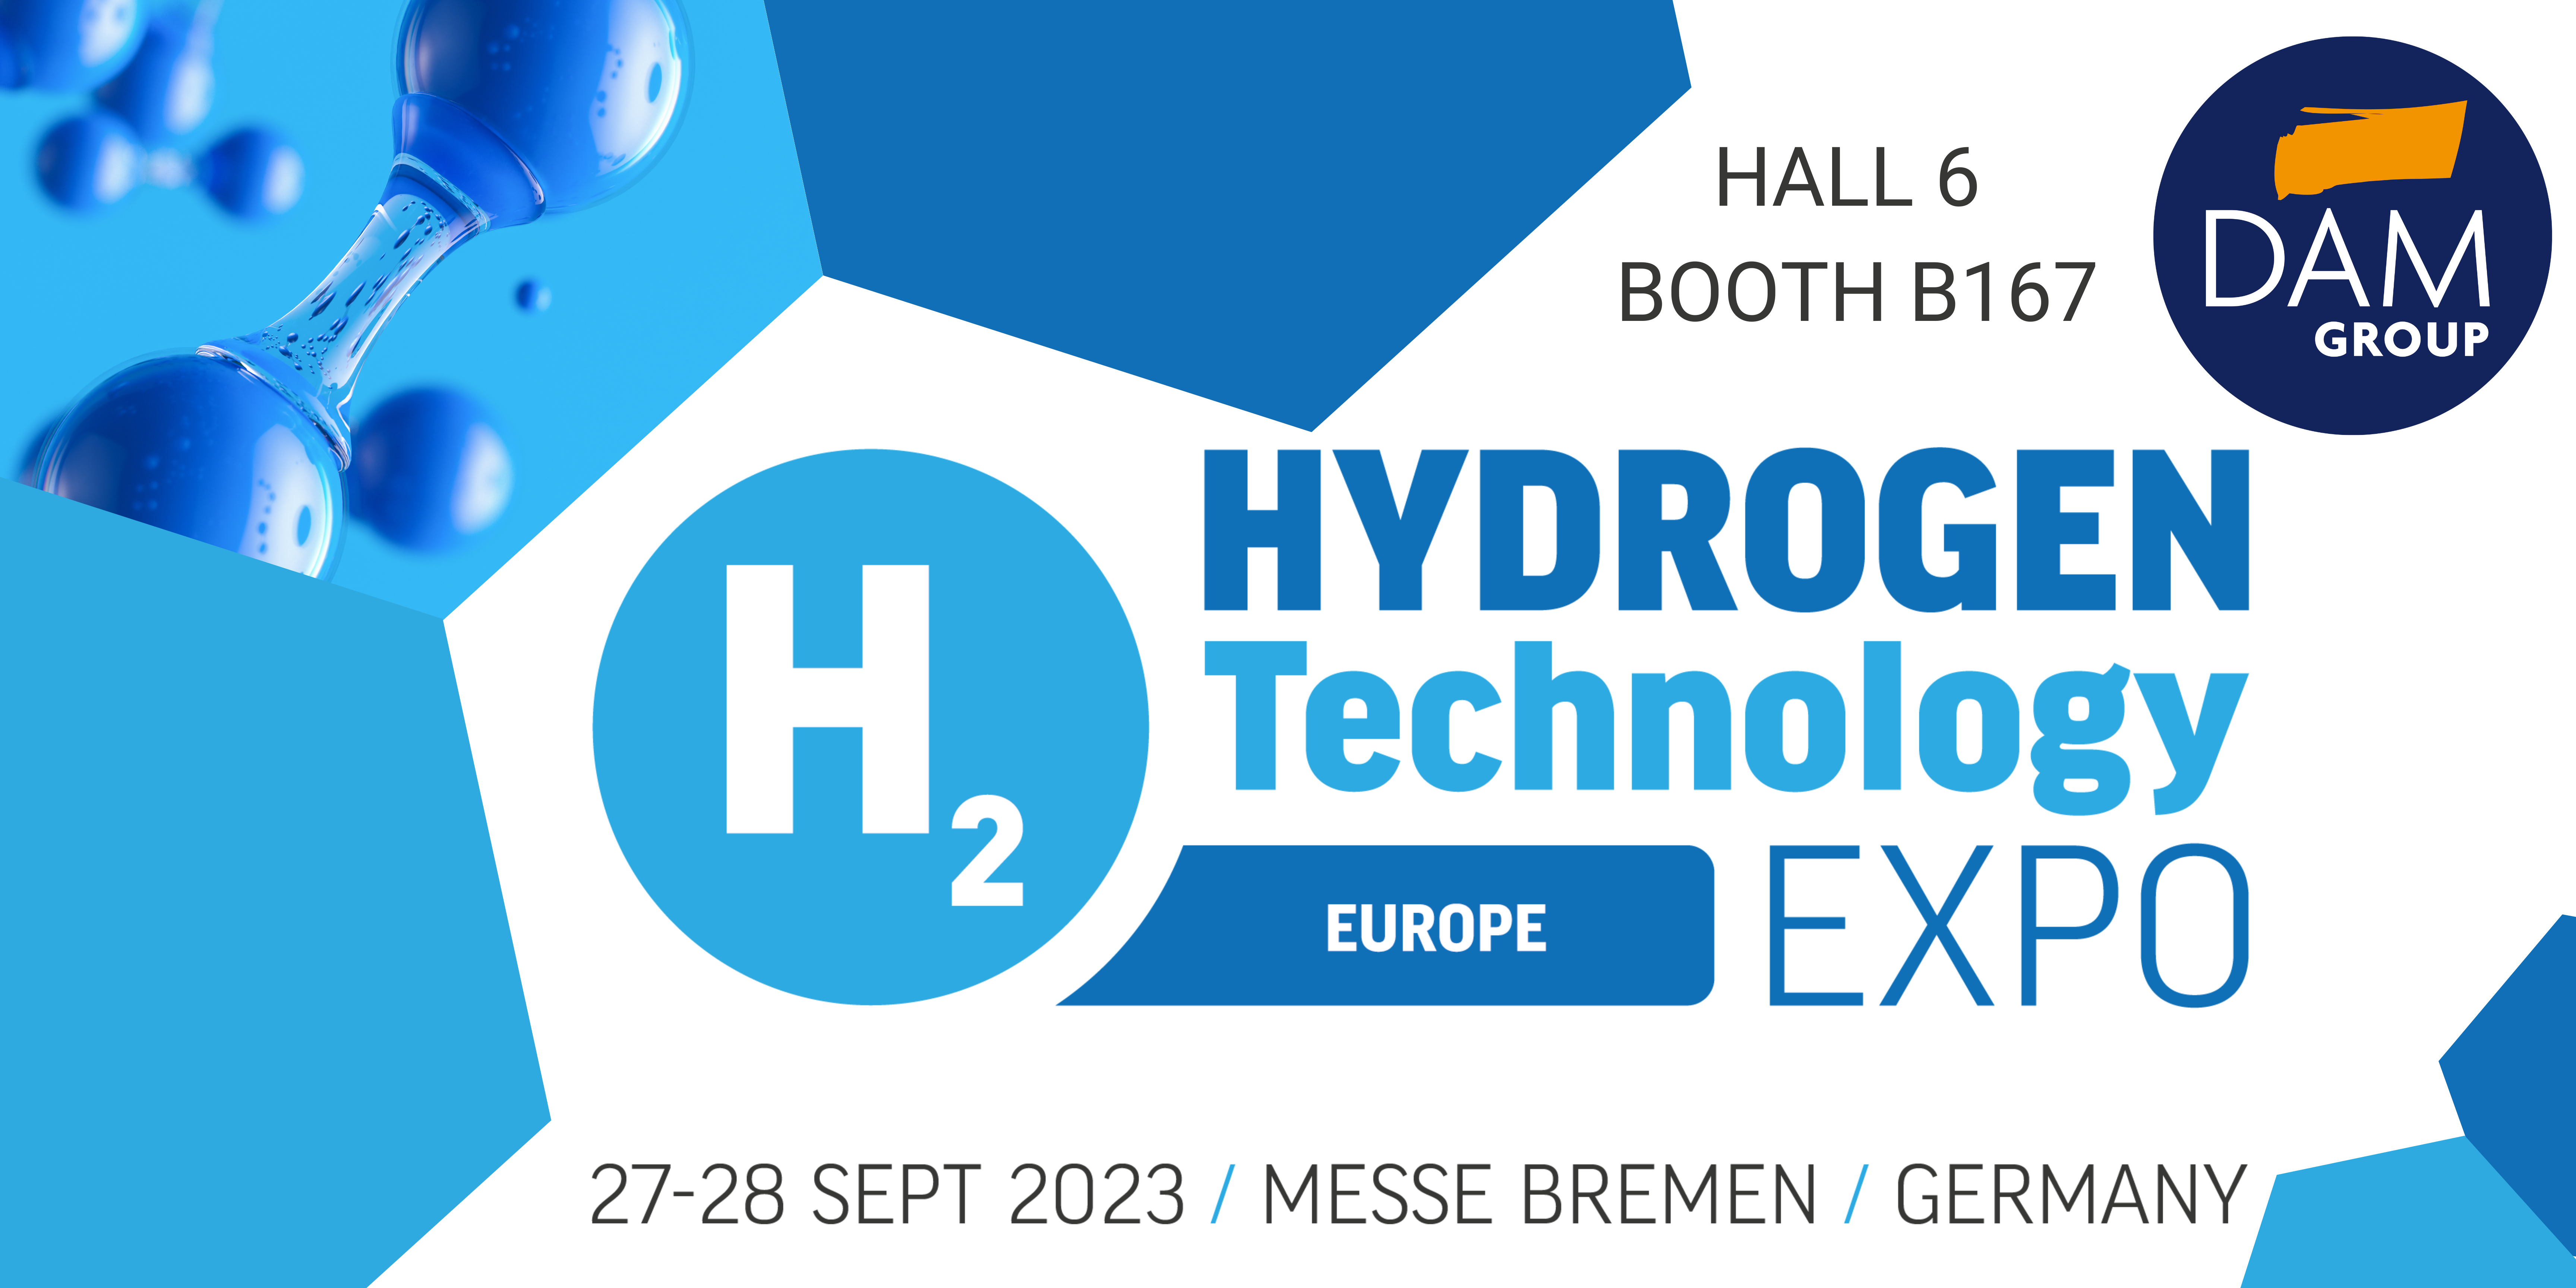 DAM GROUP AWAITS YOU IN BREMEN AT THE END OF SEPTEMBER FOR HYDROGEN TECHNOLOGY EXPO EUROPE